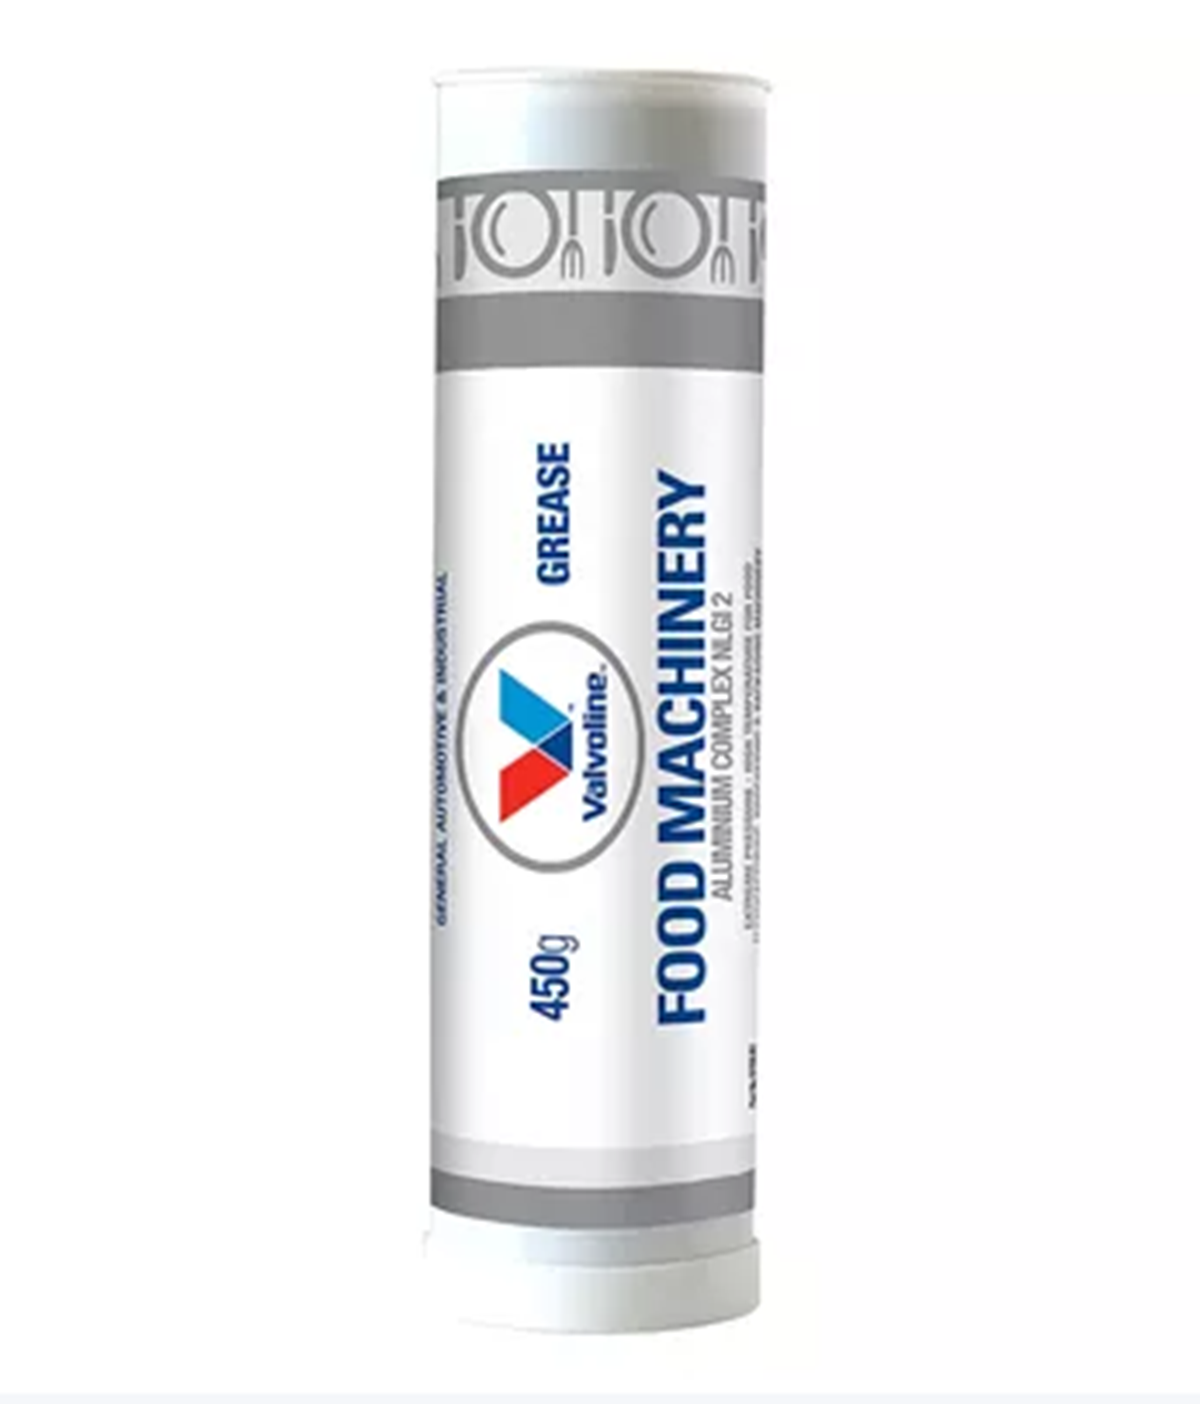 Valvoline Food Machinery Grease 450g